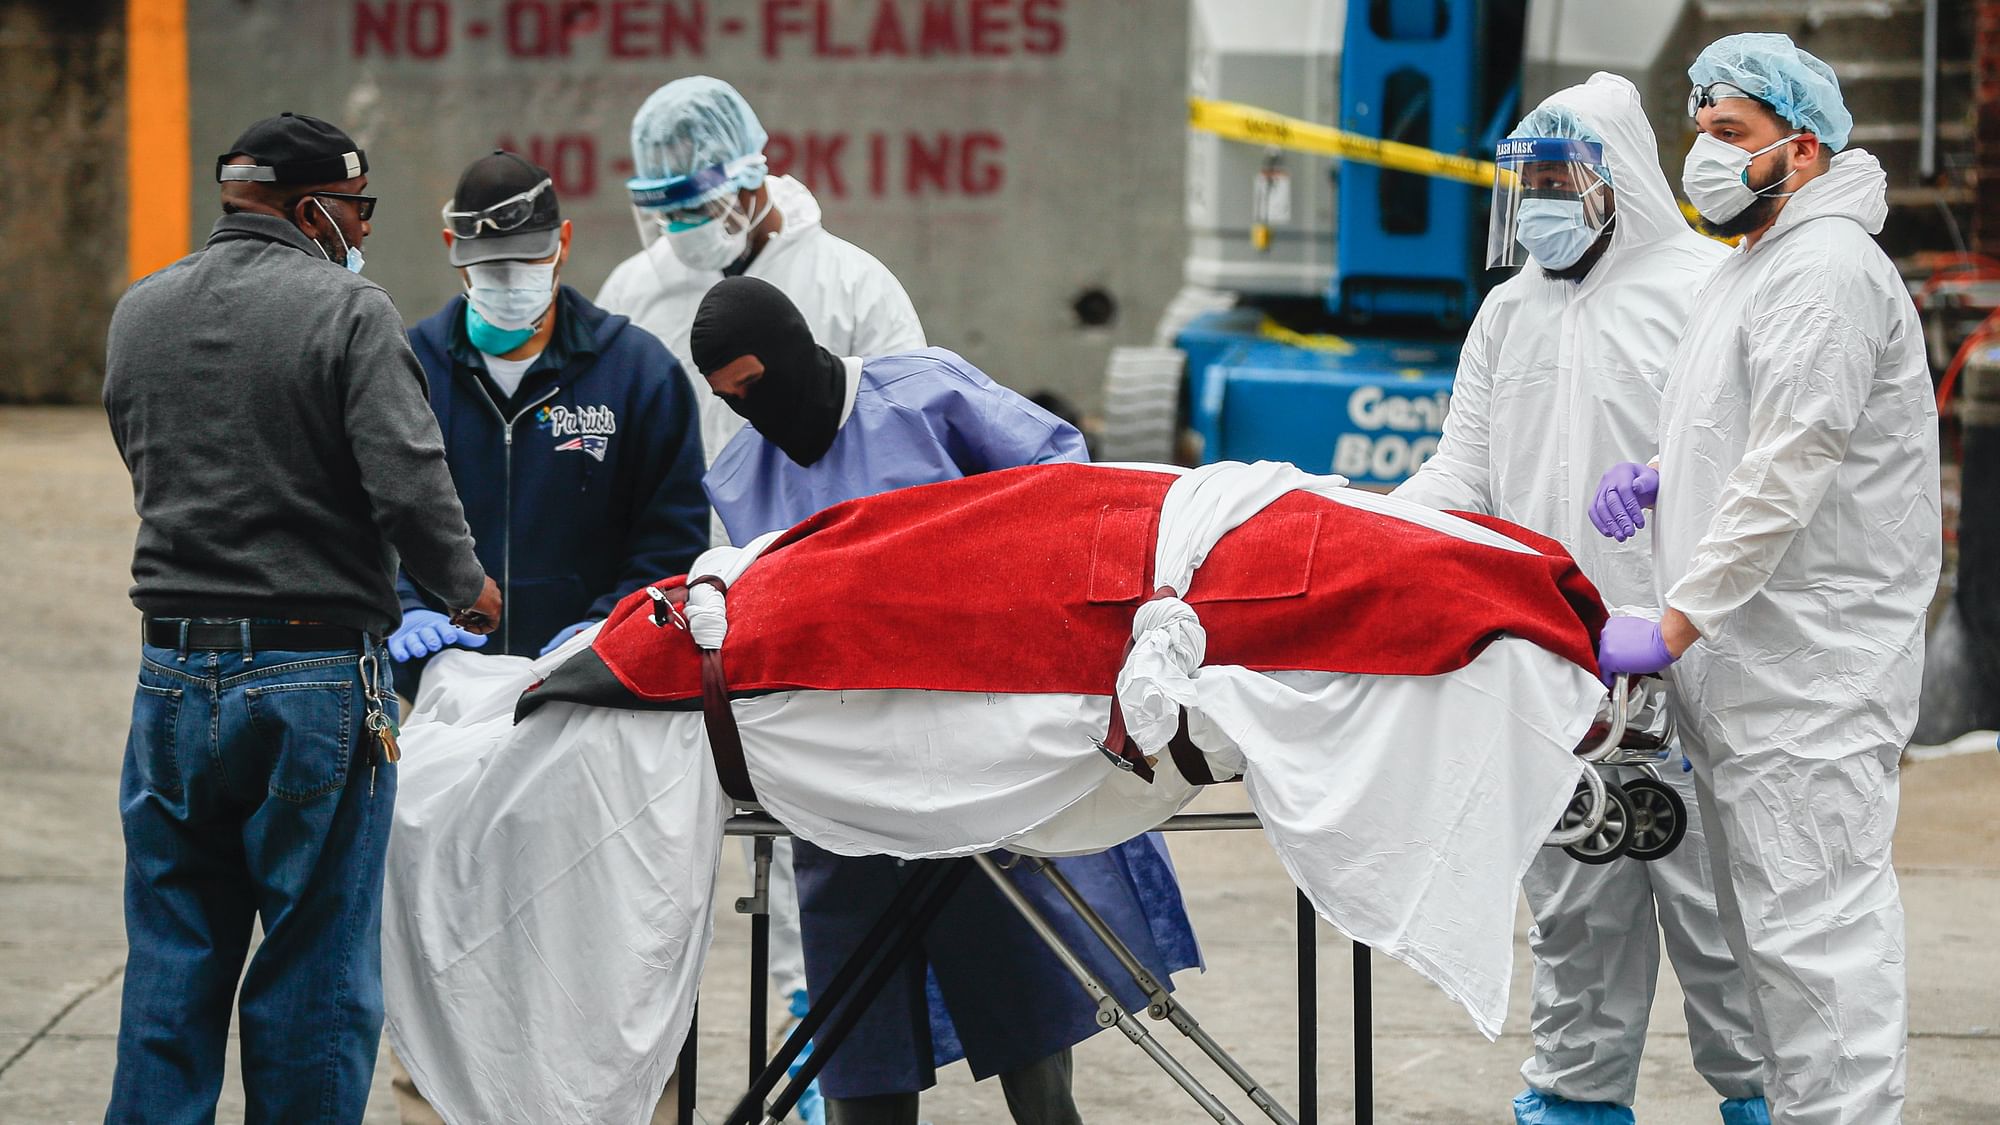 A body wrapped in plastic that was unloaded from a refrigerated truck is handled by medical workers wearing personal protective equipment due to COVID-19 concerns at Brooklyn Hospital Center in Brooklyn borough of New York.